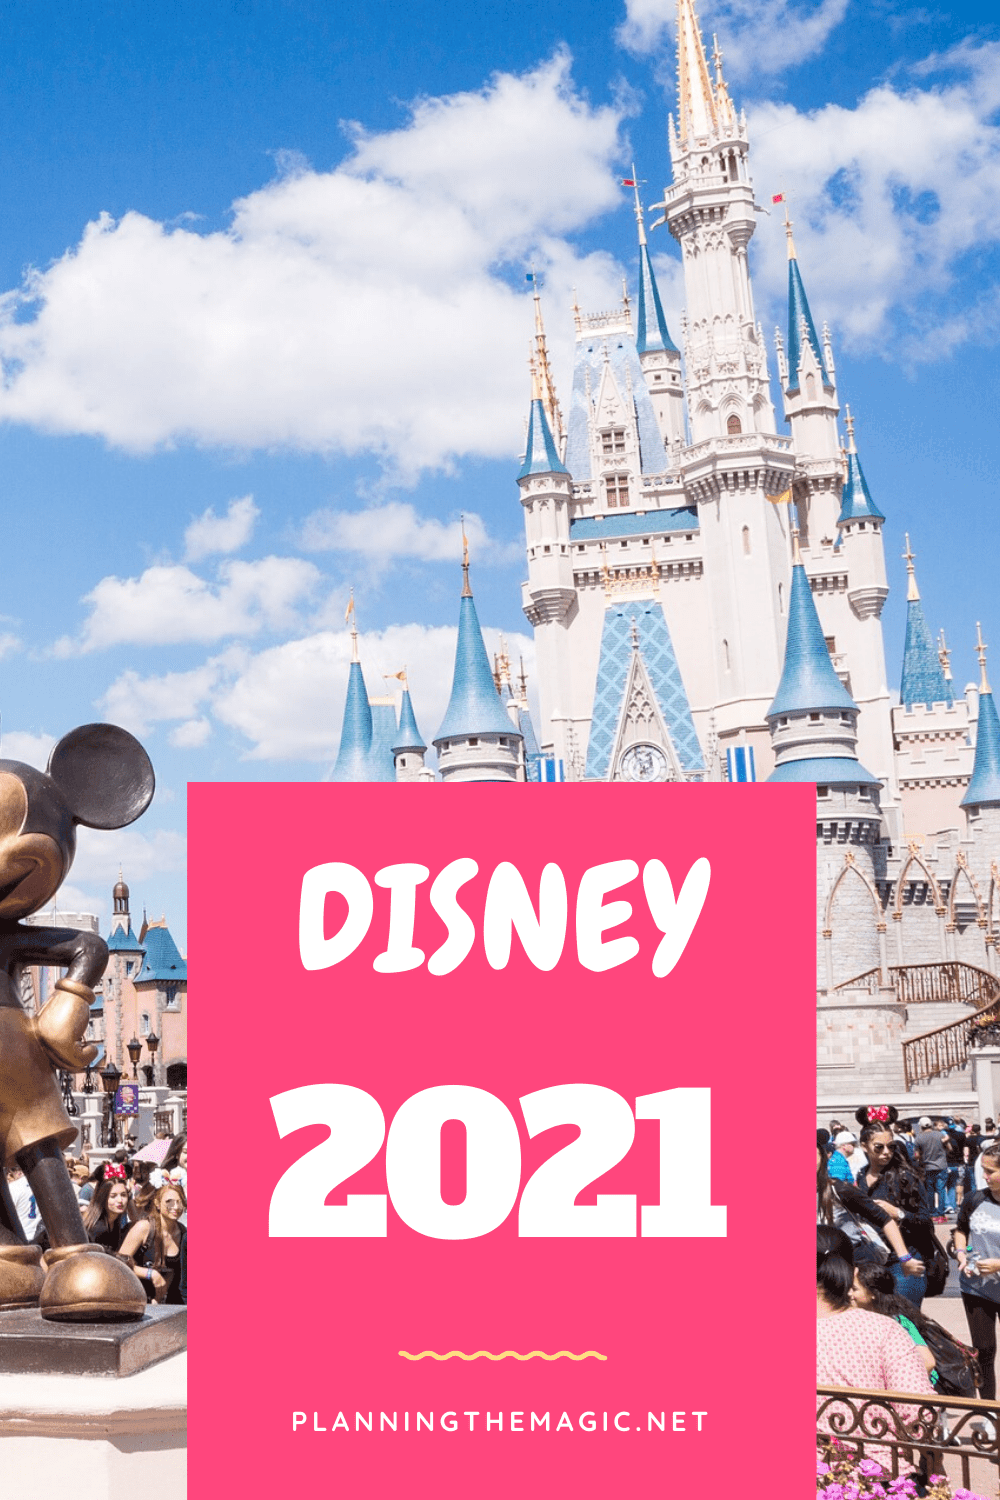 Disney 2021 – Everything you need to know - Planning The Magic